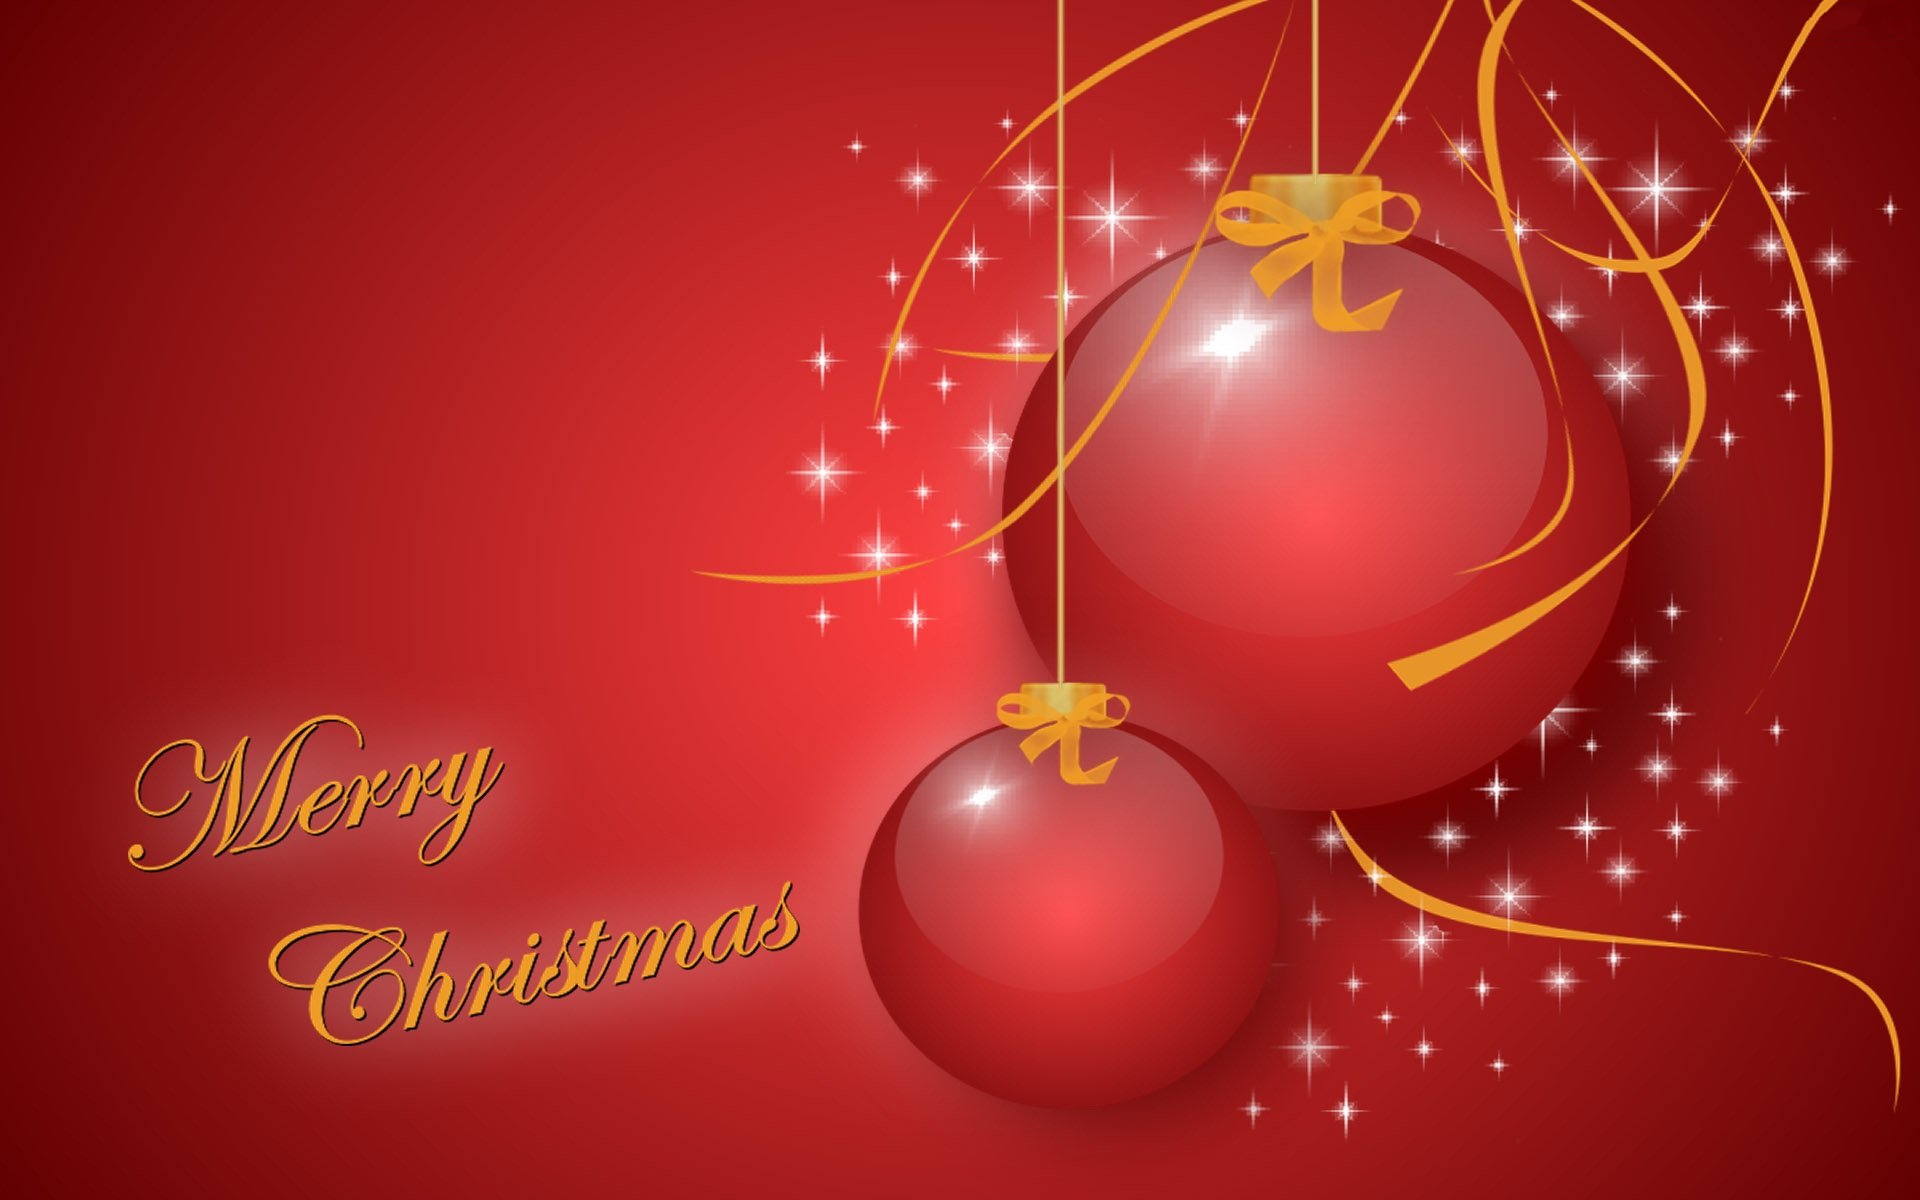 Merry Christmas HD Wallpaper Red 2016.